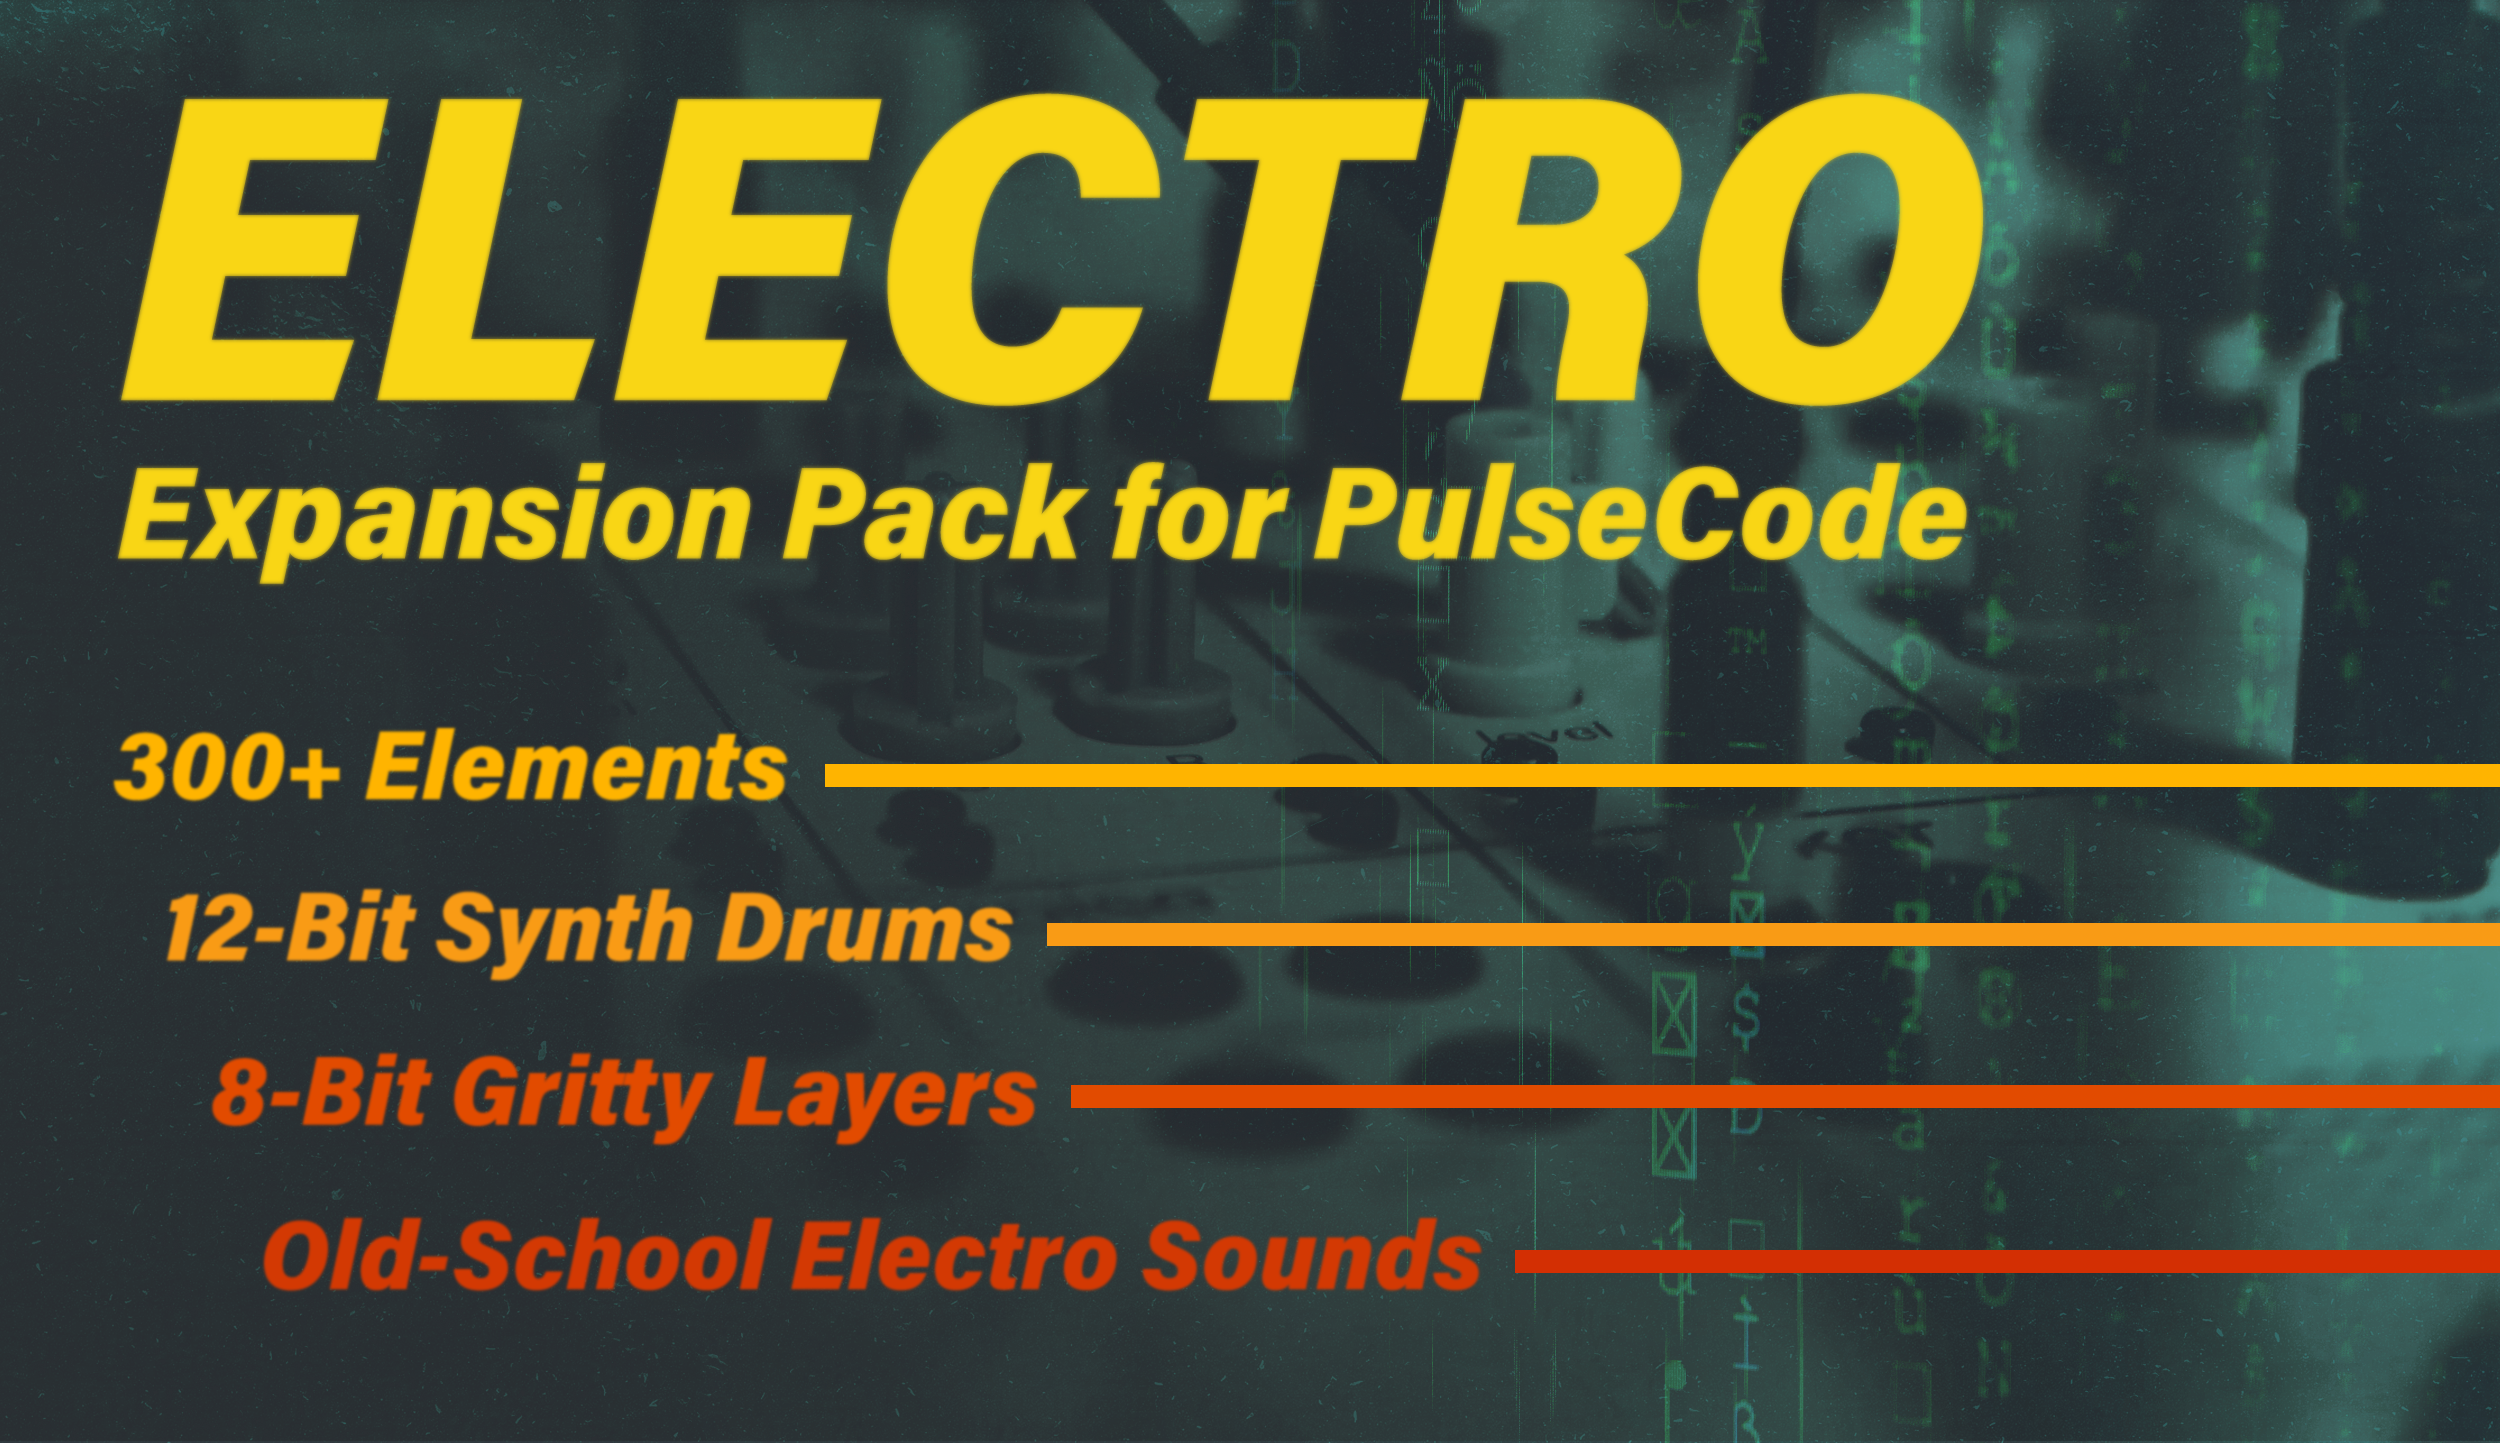 Electro is a collection of 300+ 12-bit techno drums for PulseCode